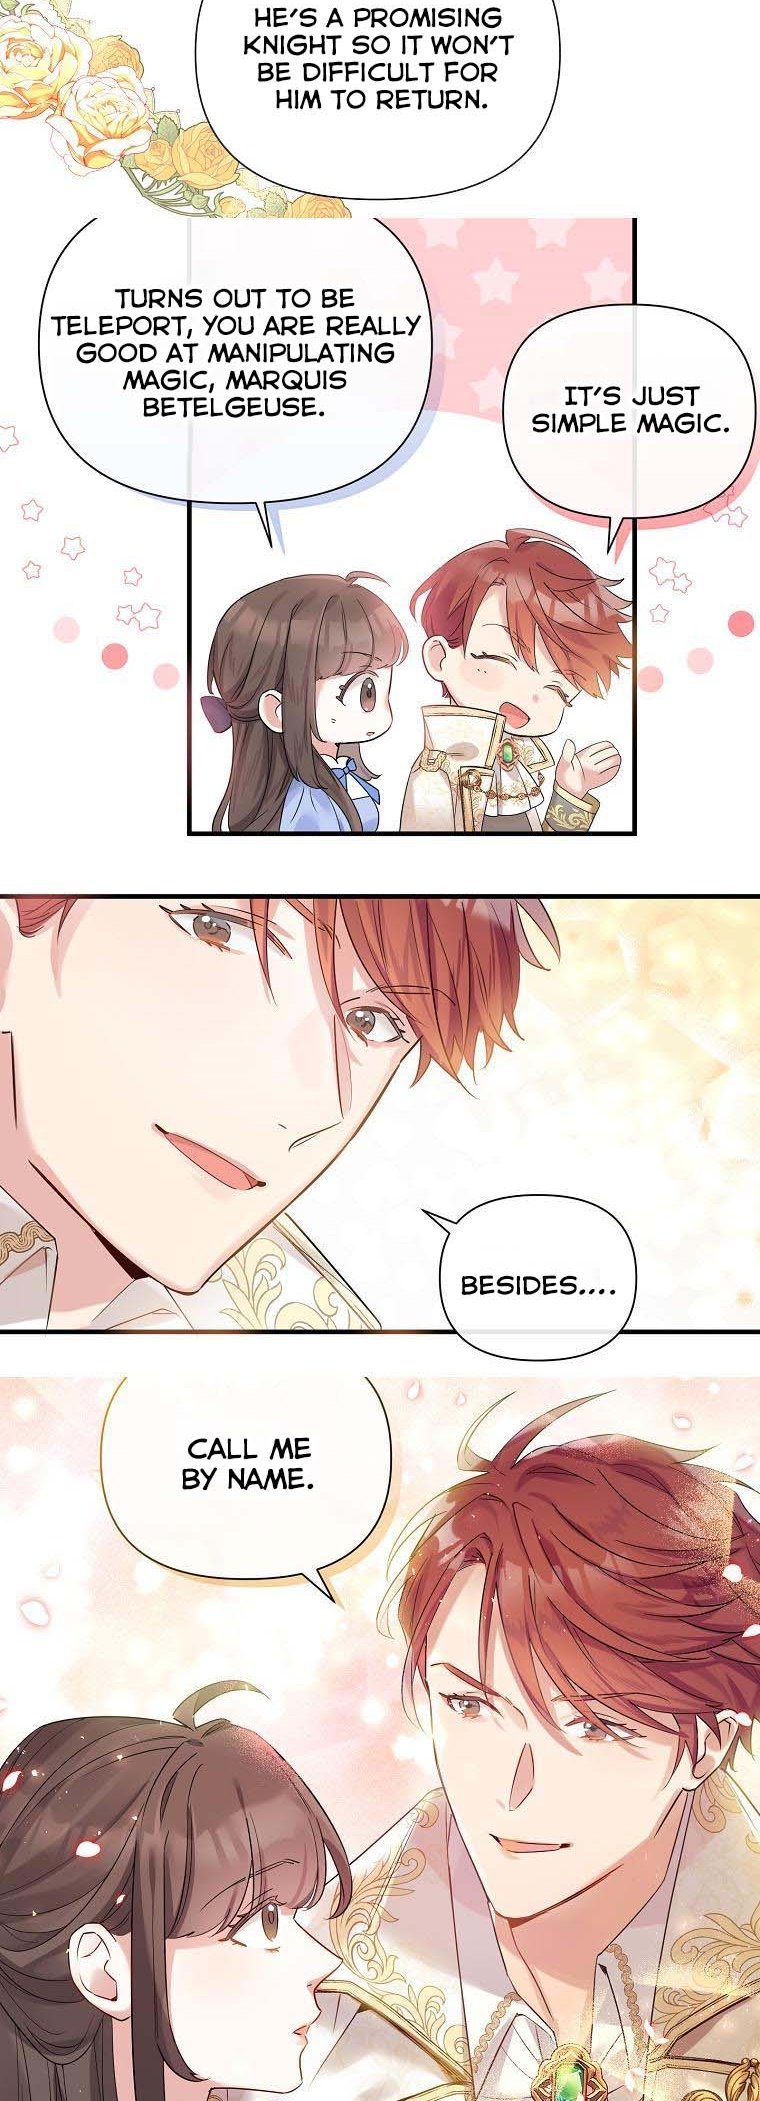 Marriage B chapter 2